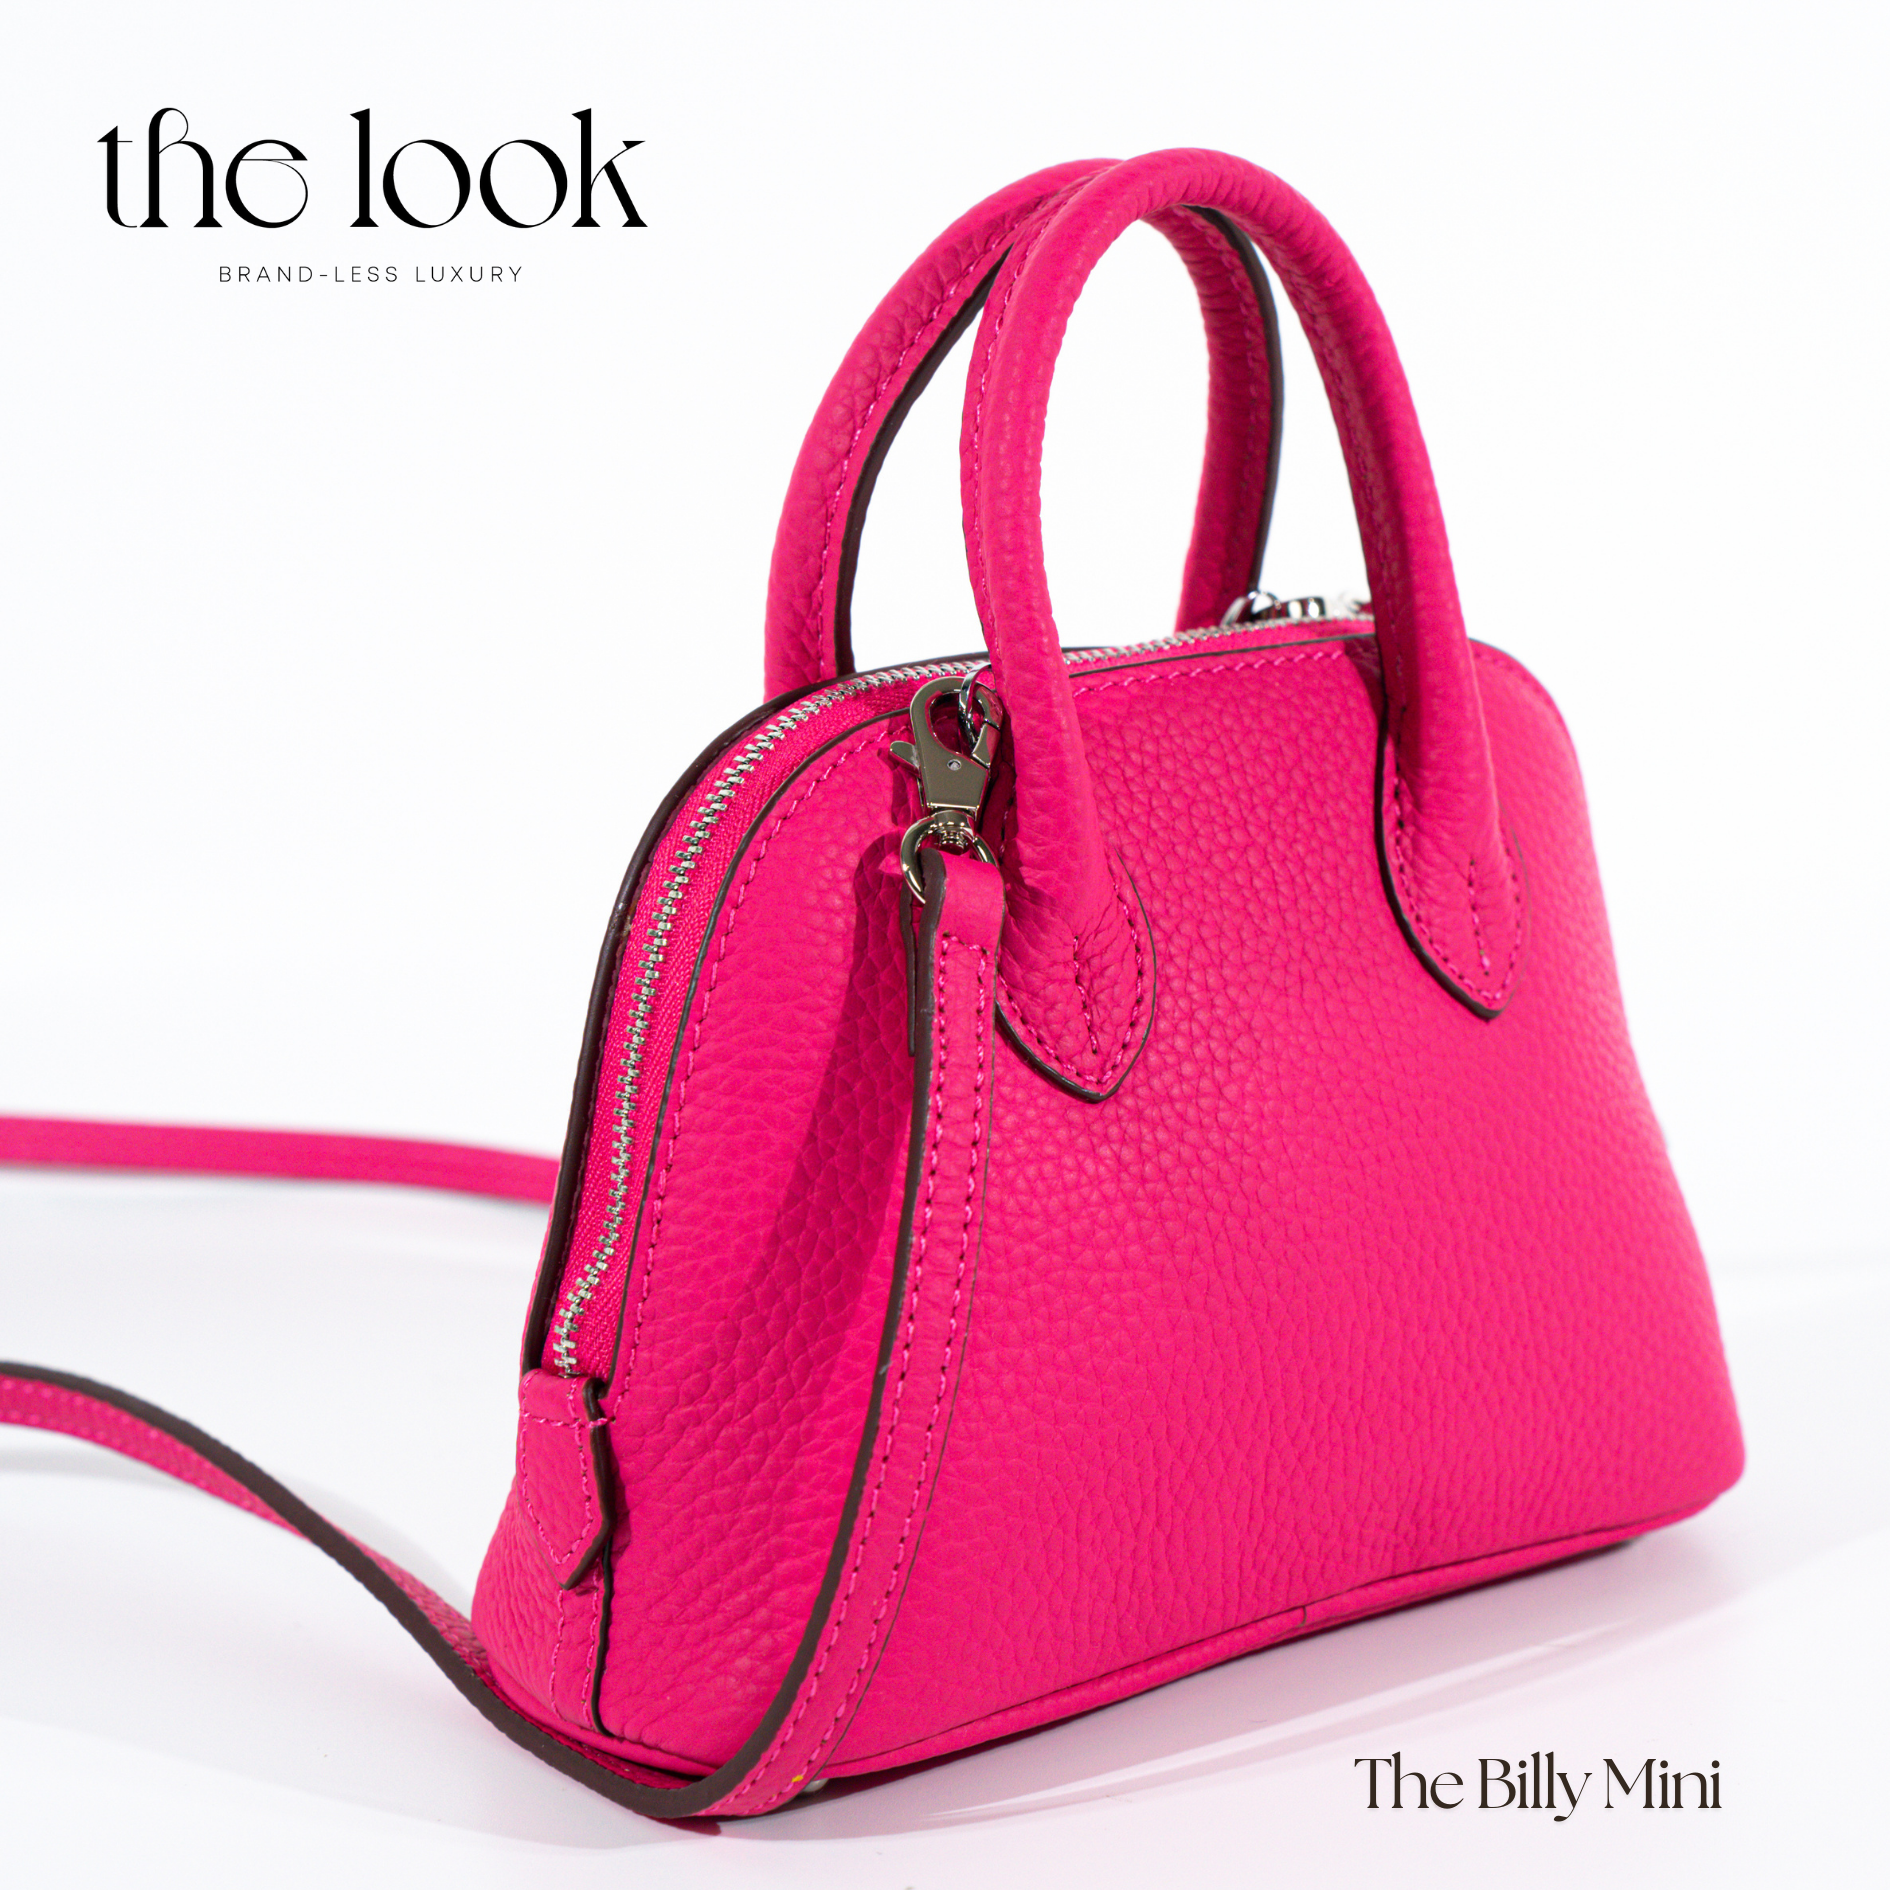 The Mini Billy Dome Crossbody in Hot Pink by The Look